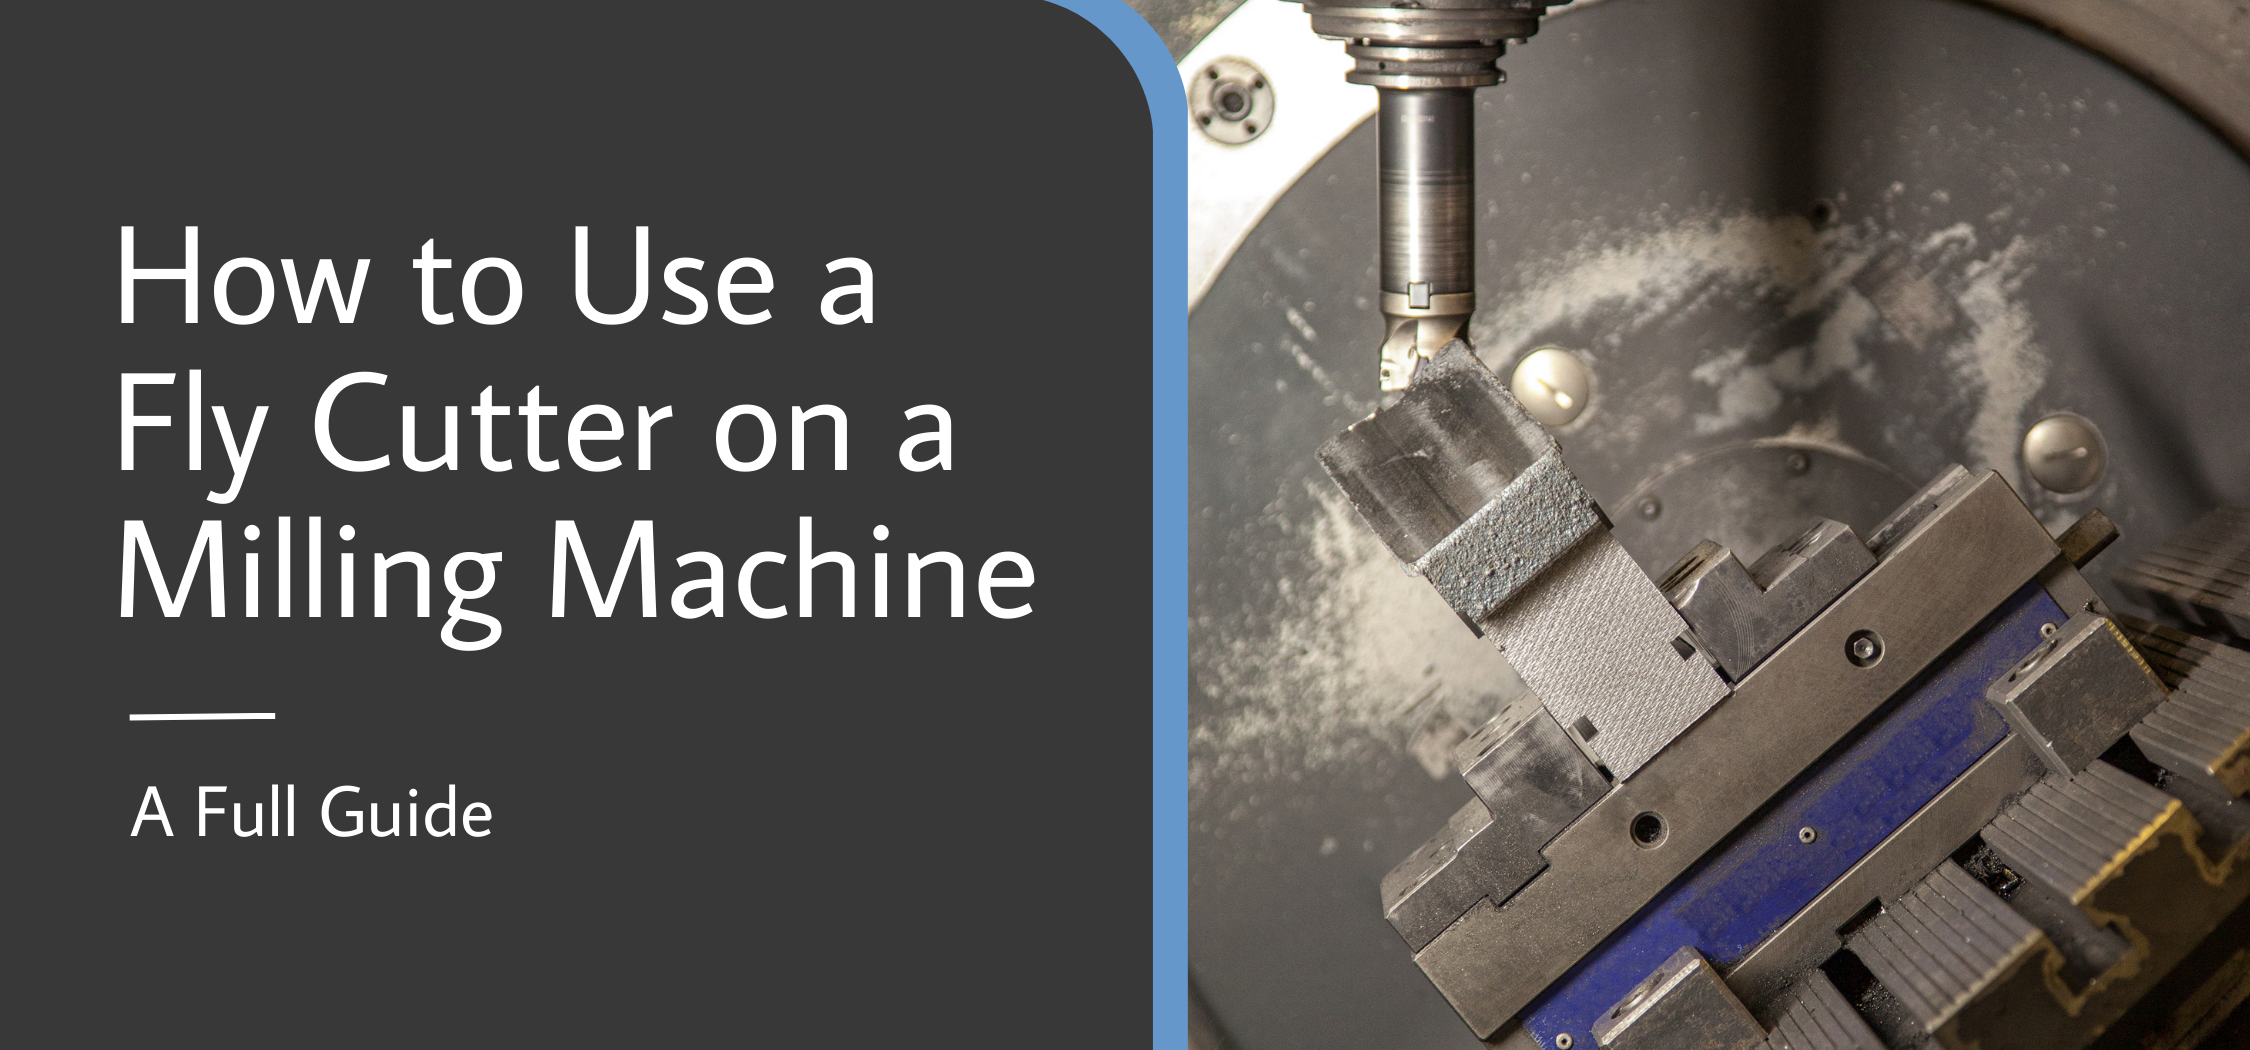 How to Use a Fly Cutter on a Milling Machine [A Full Guide]